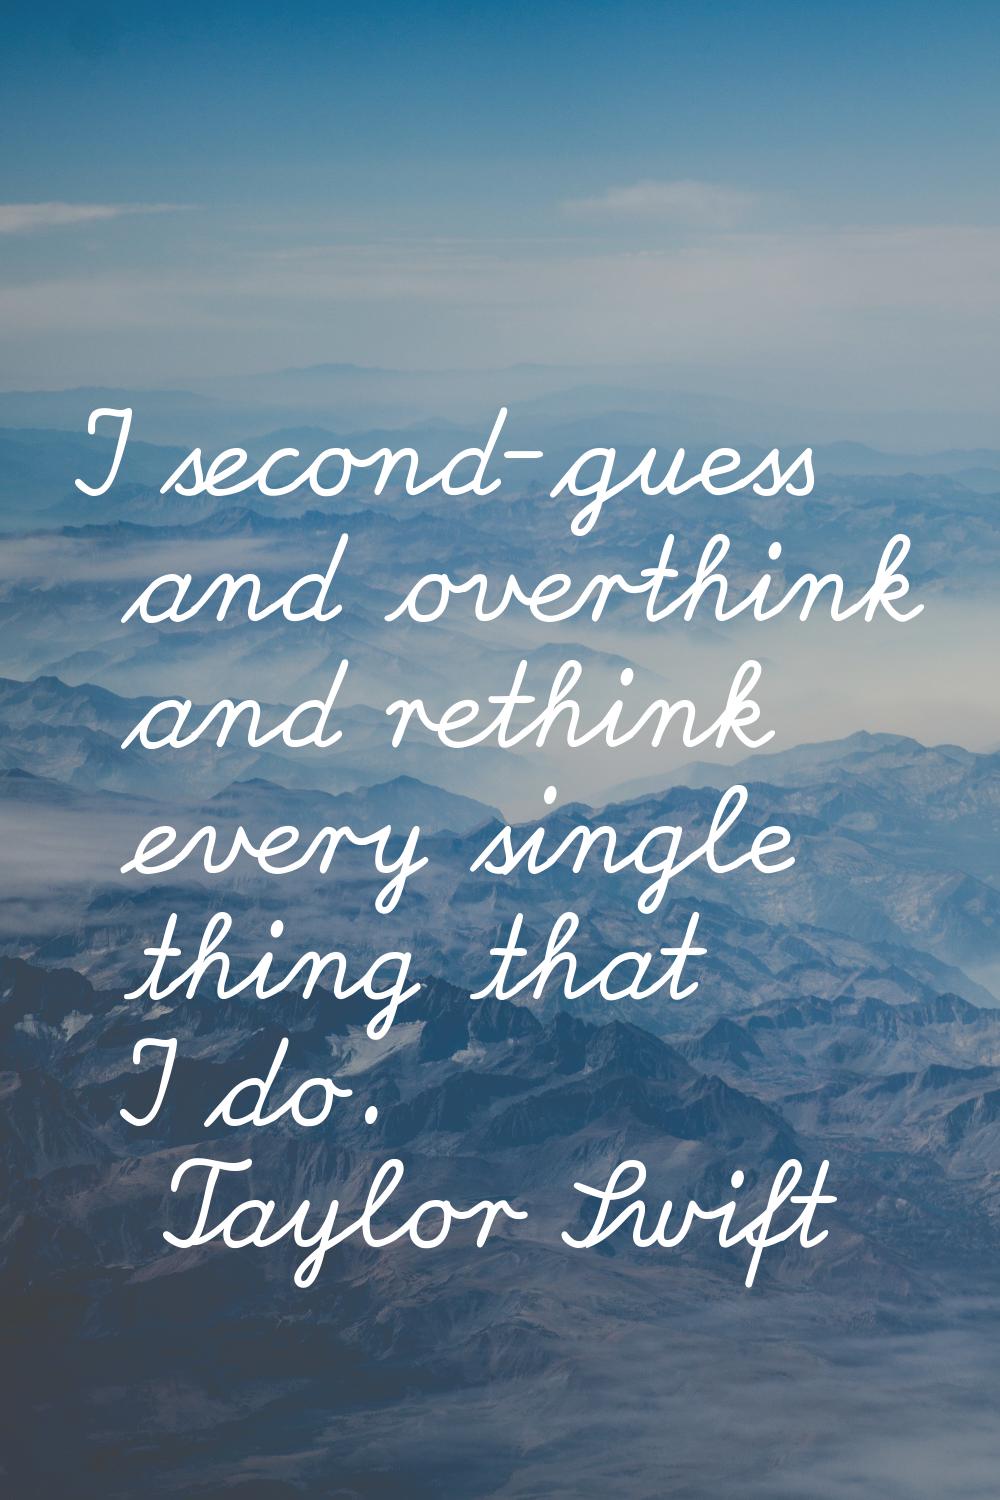 I second-guess and overthink and rethink every single thing that I do.